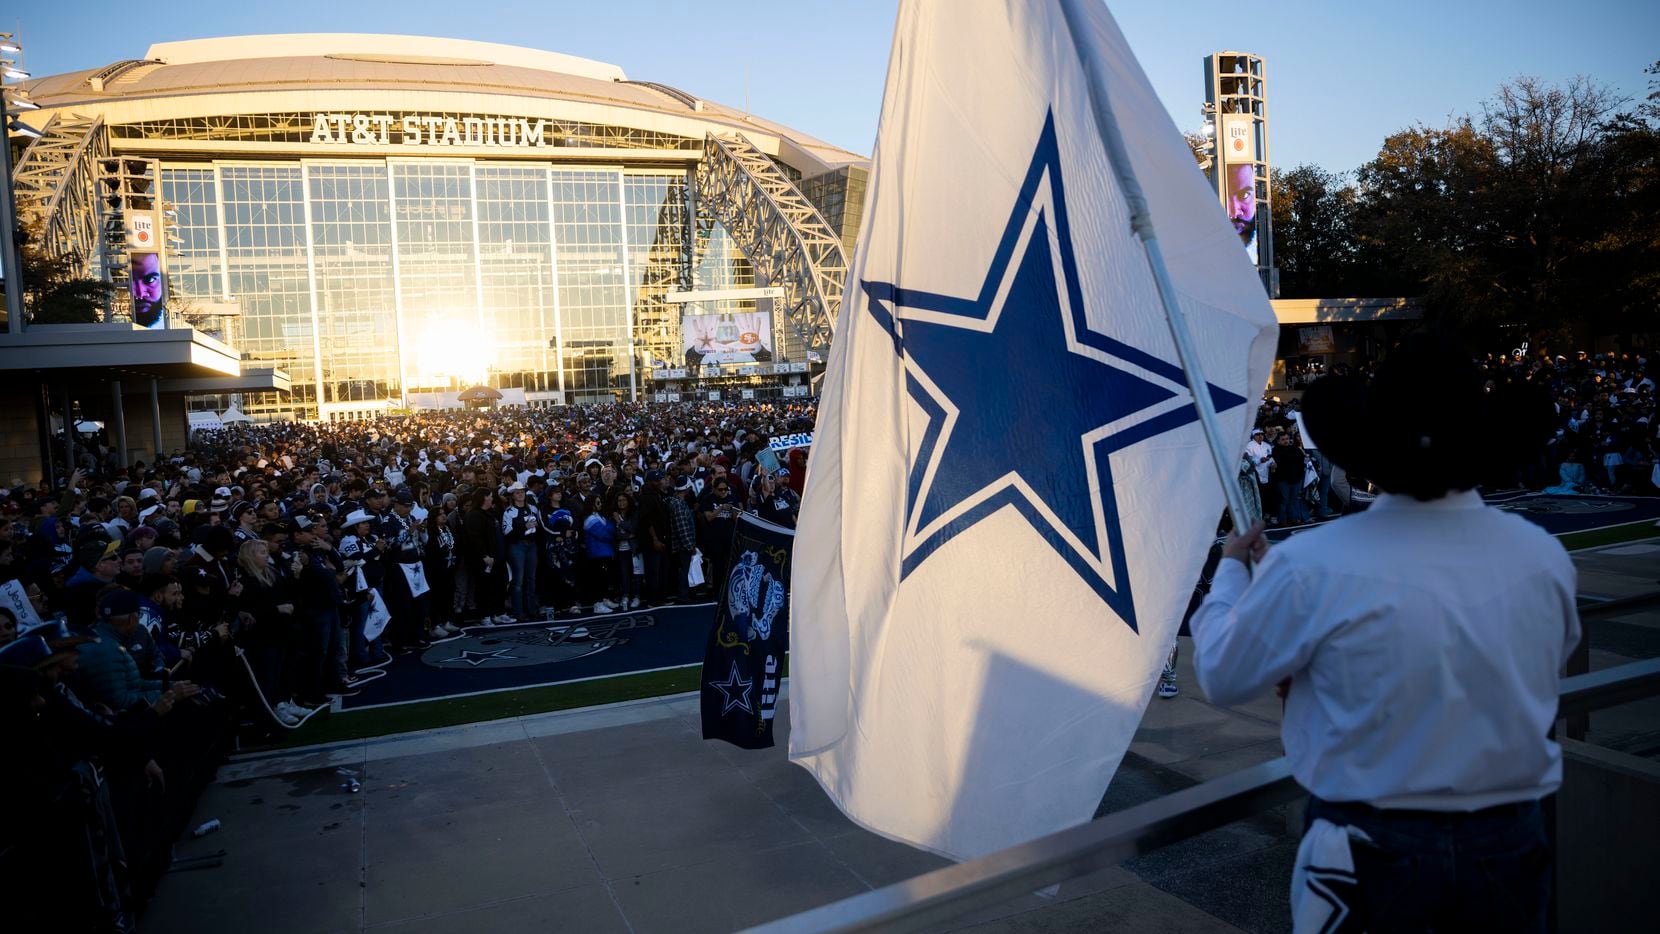 Dallas Cowboys plan nearly $350 million in renovations to AT&T Stadium